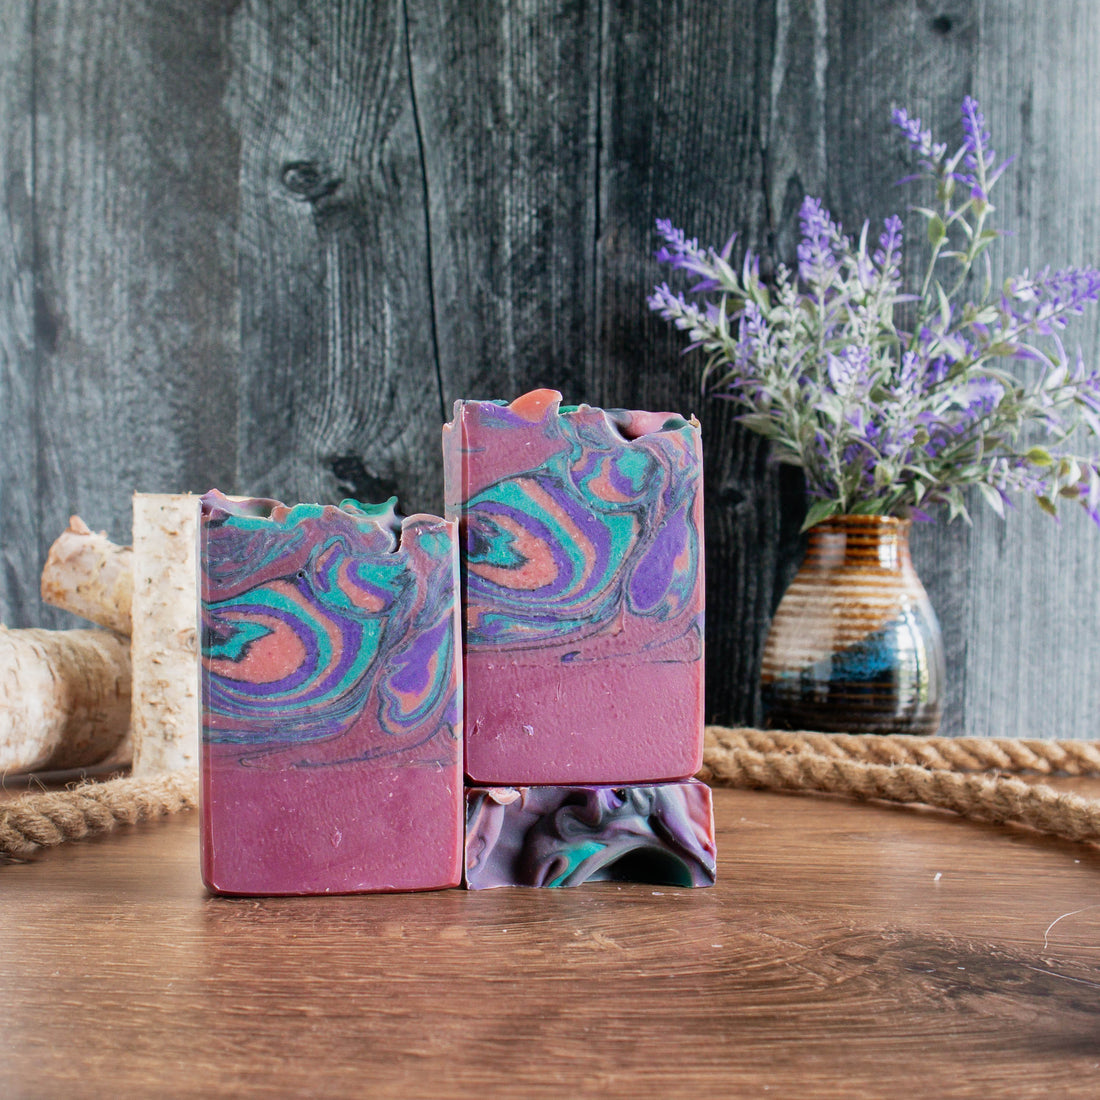 3 bars of black amber and lavender soap showing the reddish bottom third and green, purple and orange swirls on top. One bar is laying flat to show a scoopy top. there is a black rusted wood backdrop and a walnut wood base with some rope, small wood logs and a vase of flowers in the background.